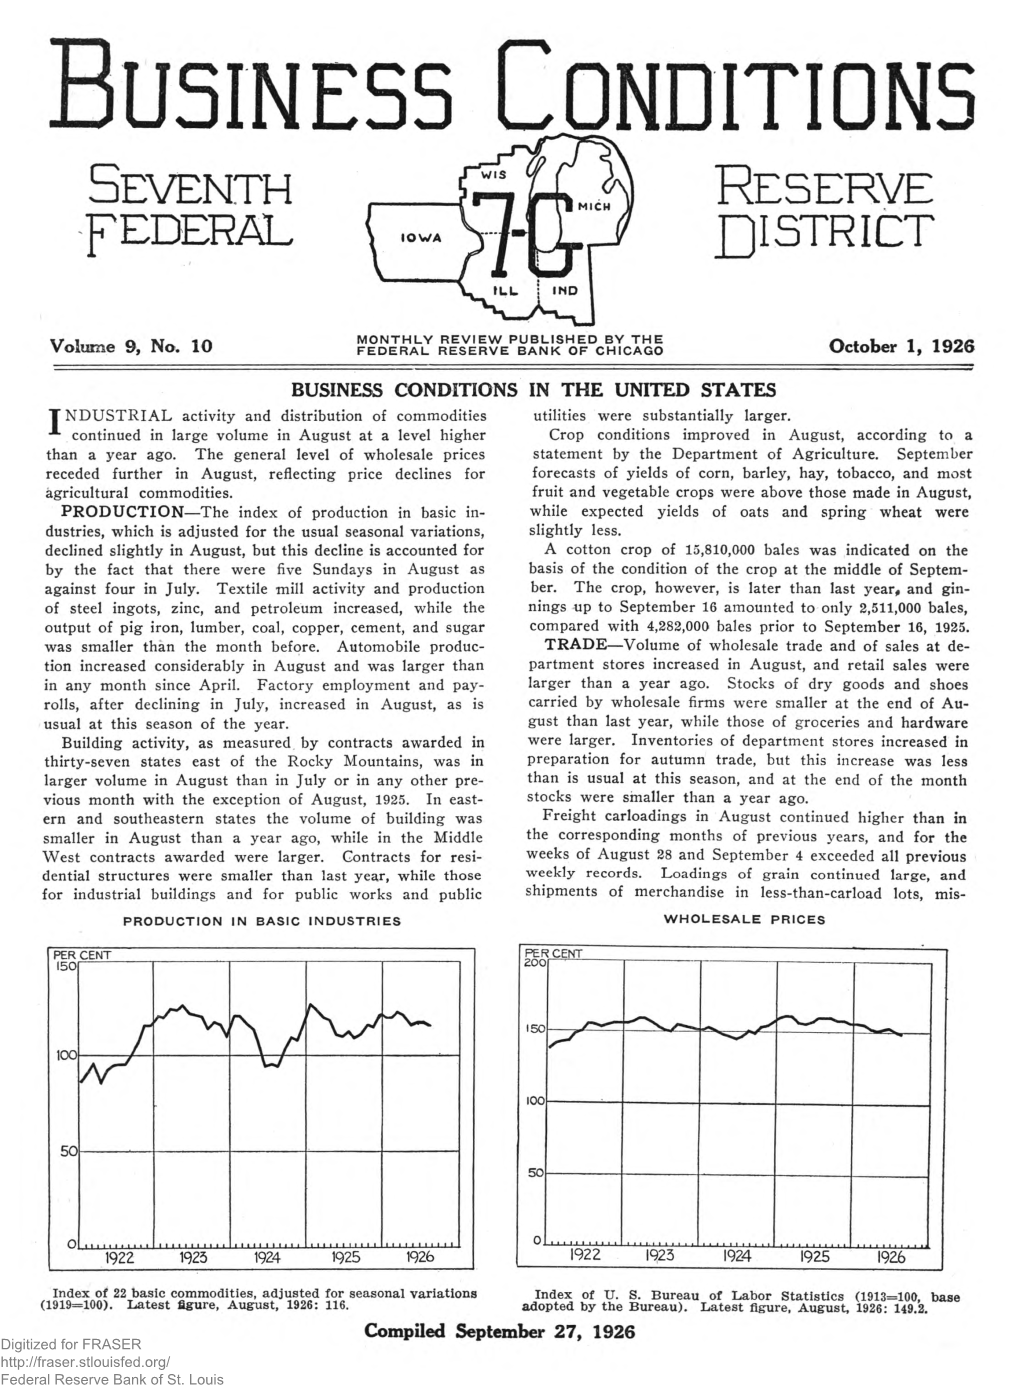 Business Conditions: October 1, 1926, Volume 9, Number 10